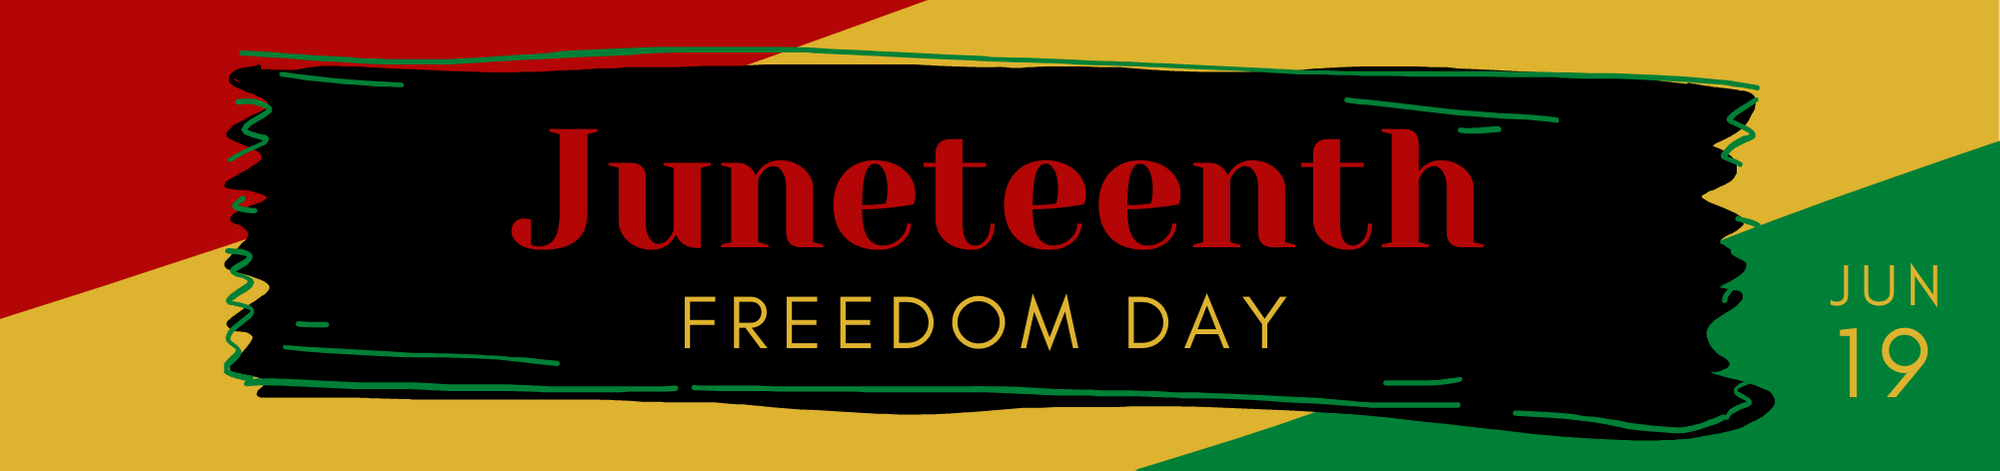 Juneteenth - Freedom Day - June 19